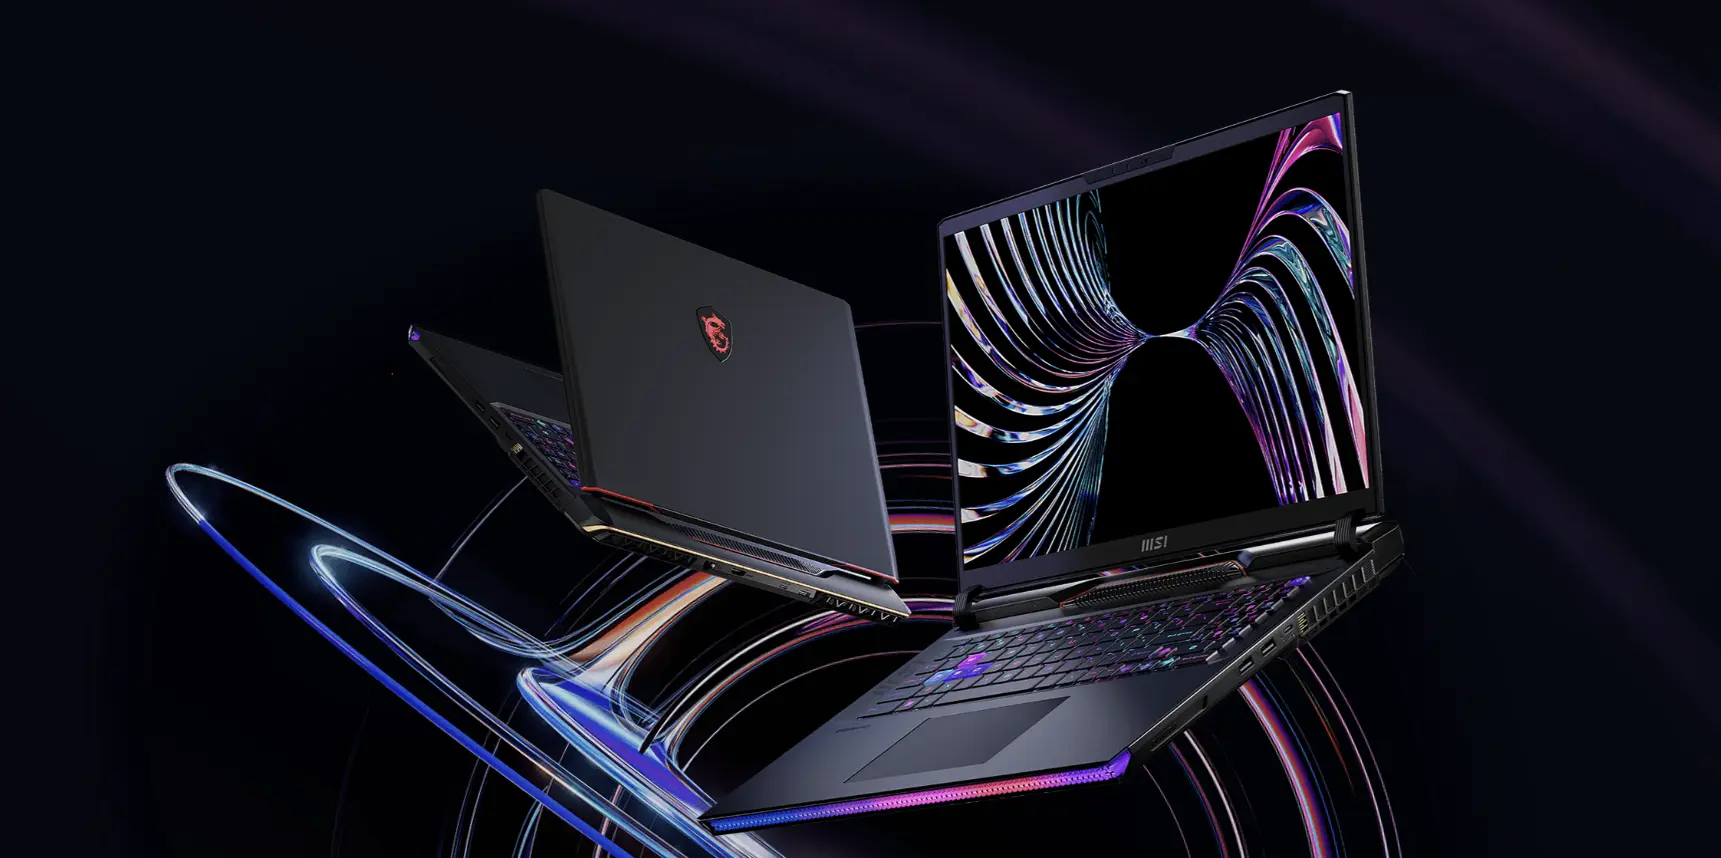 MSI launches a host of laptops at CES 2023. Apparently, they are built well.